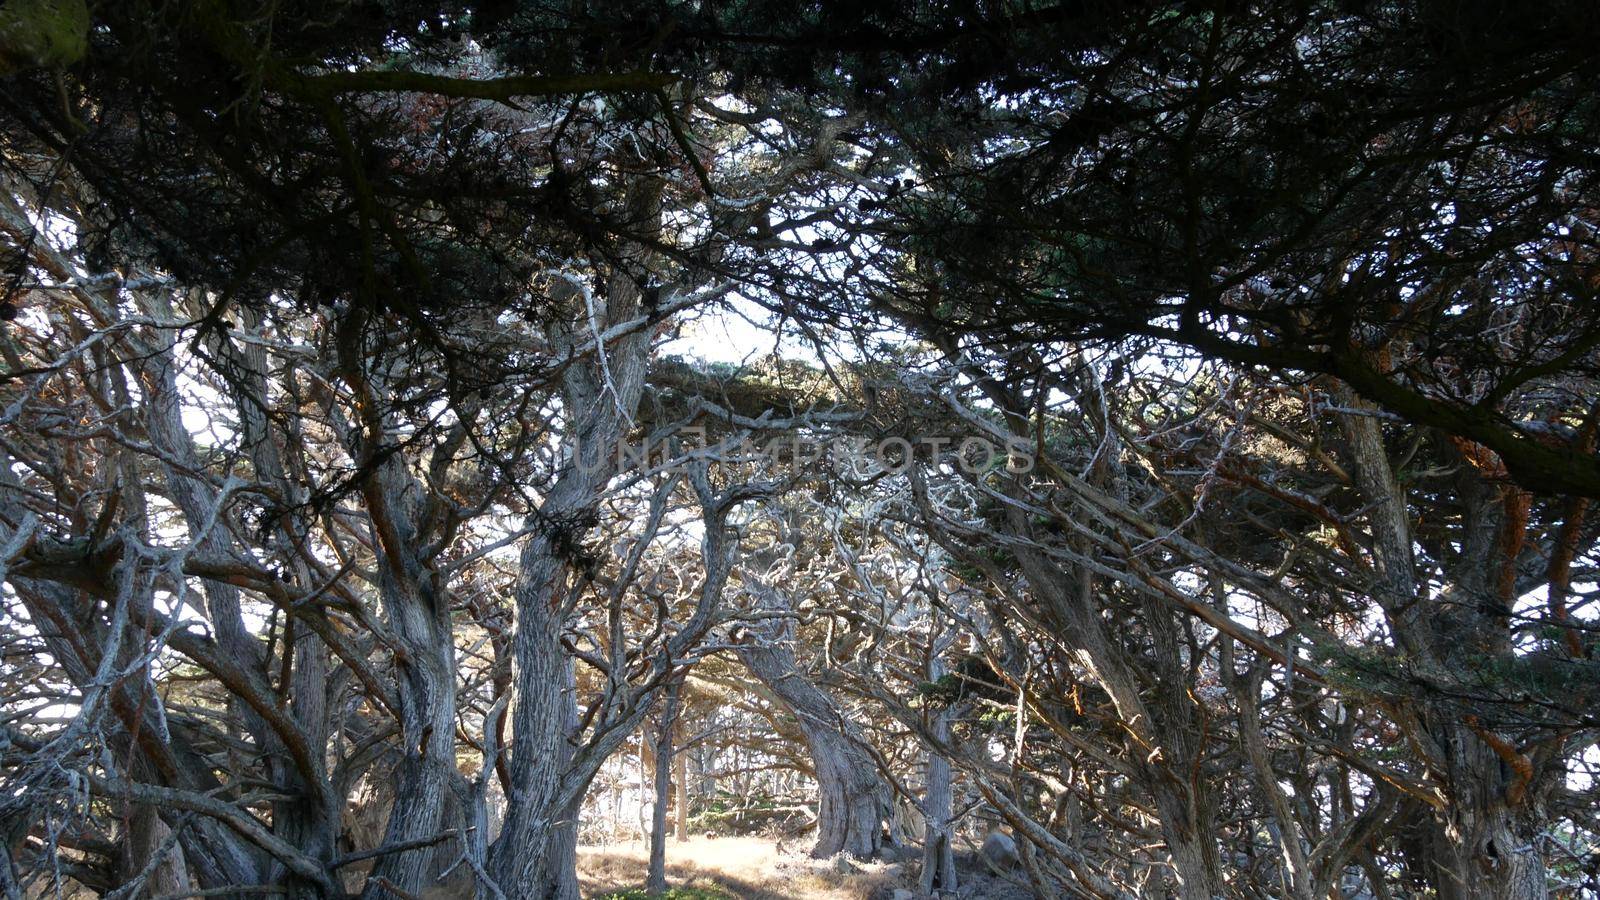 Path in forest or wood, trail in grove or woodland, Point Lobos wilderness, California USA. Coniferous pine cypress trees, moss. Gnarled twisted bare leafless dead trunks and branches. Mystery fantasy